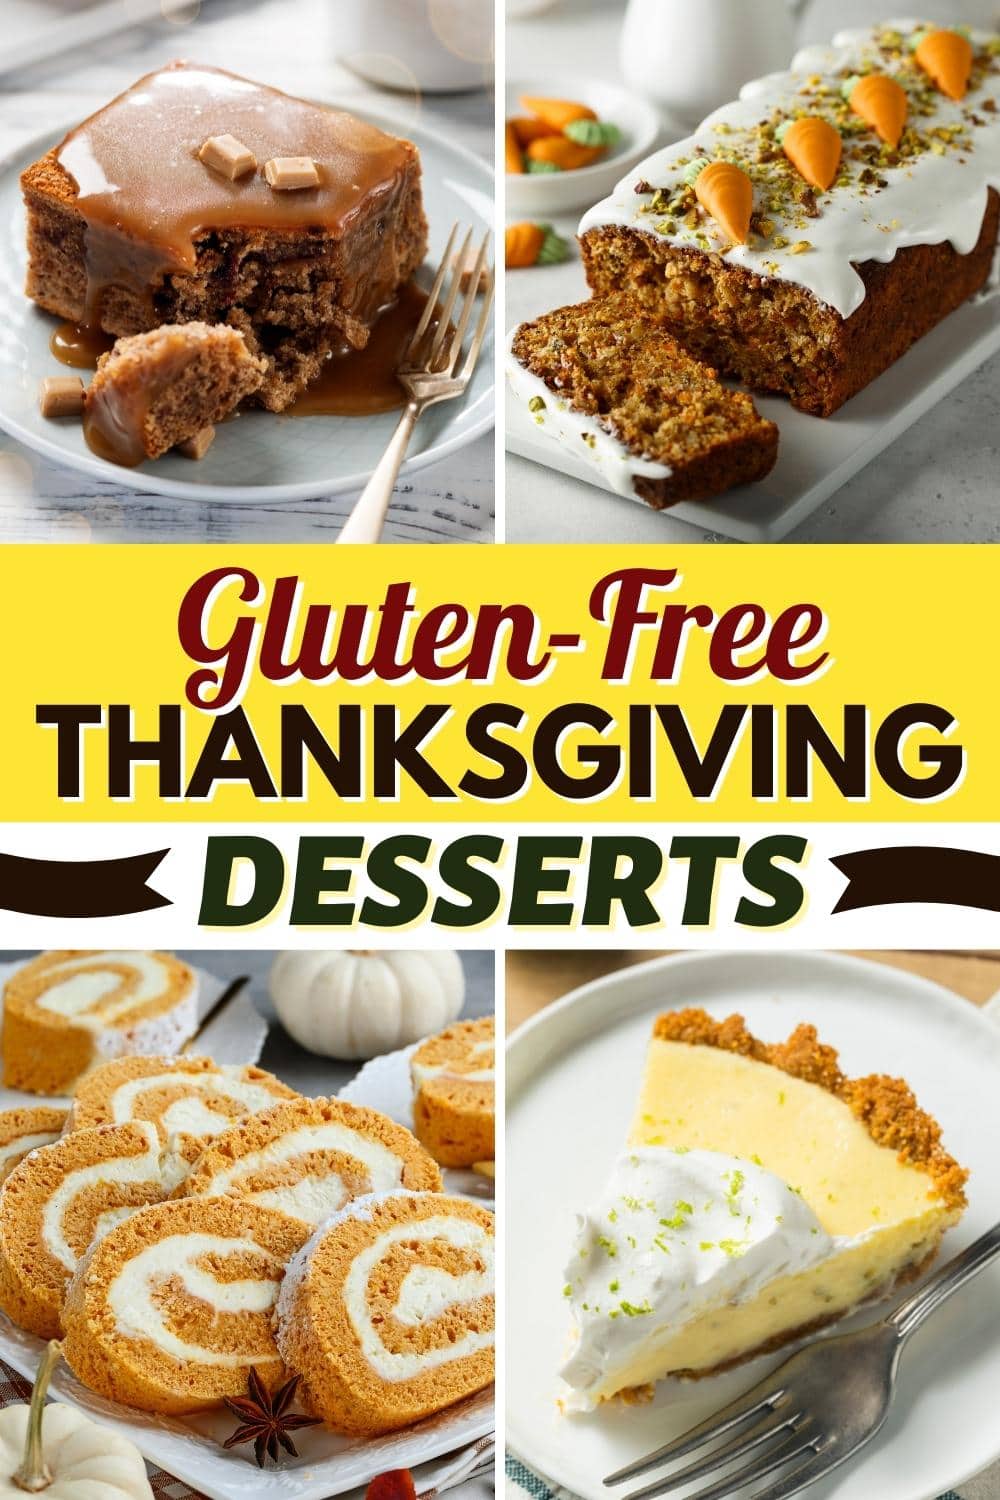 30 Gluten-Free Thanksgiving Desserts (+ Easy Recipes) - Insanely Good